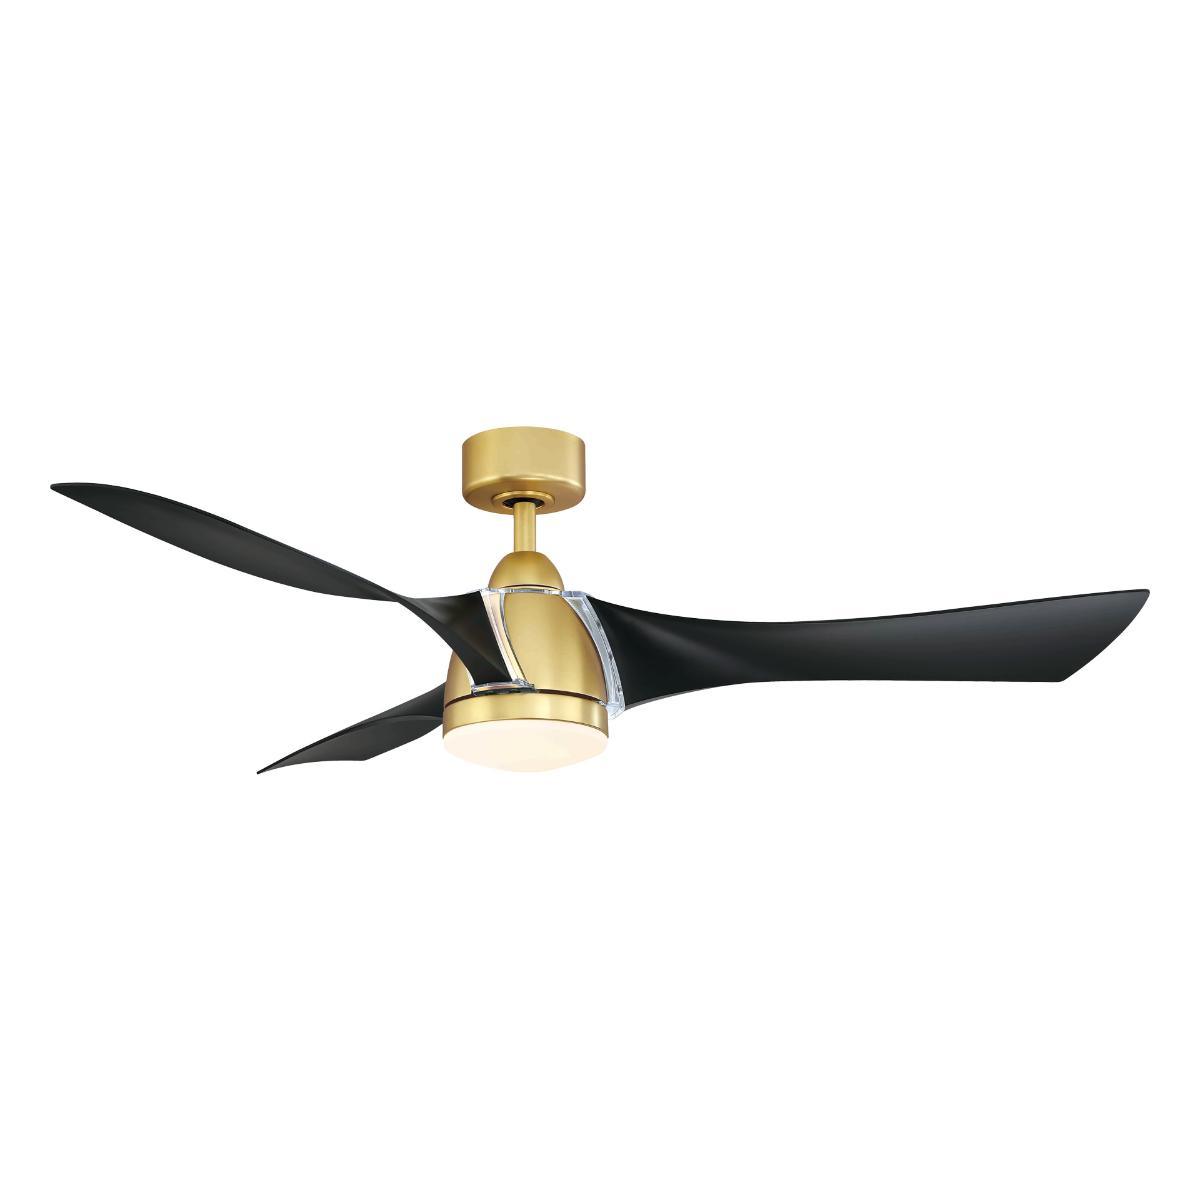 Klear 56 inch Indoor/Outdoor Ceiling Fan with LED CCT Select Light Kit and Remote, Brushed Satin Brass with Black Blades - Bees Lighting